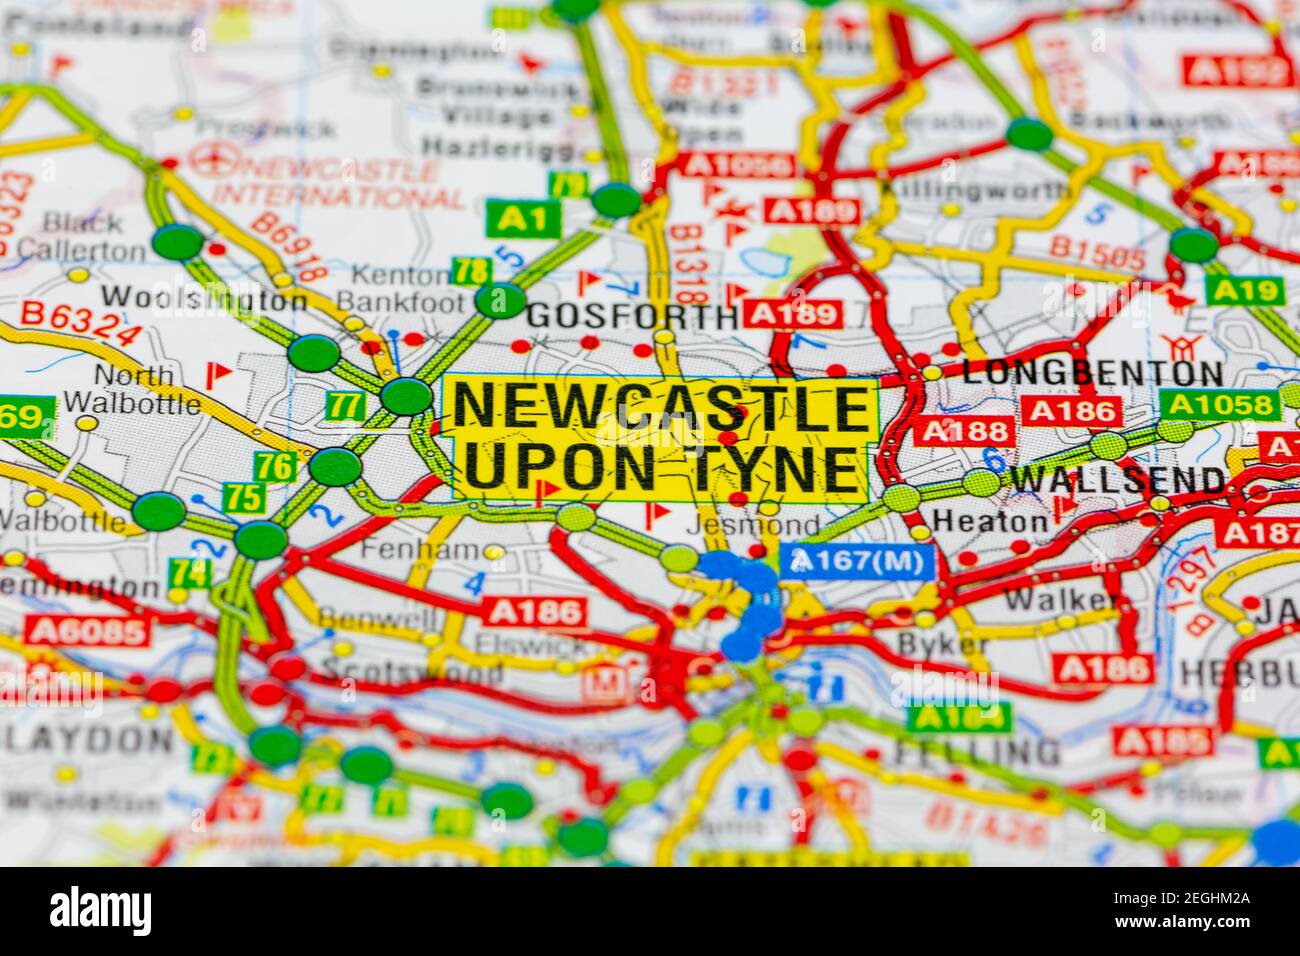 Newcastle Upon Tyne And Surrounding Areas Shown On A Road Map Or Geography Map 2EGHM2A 